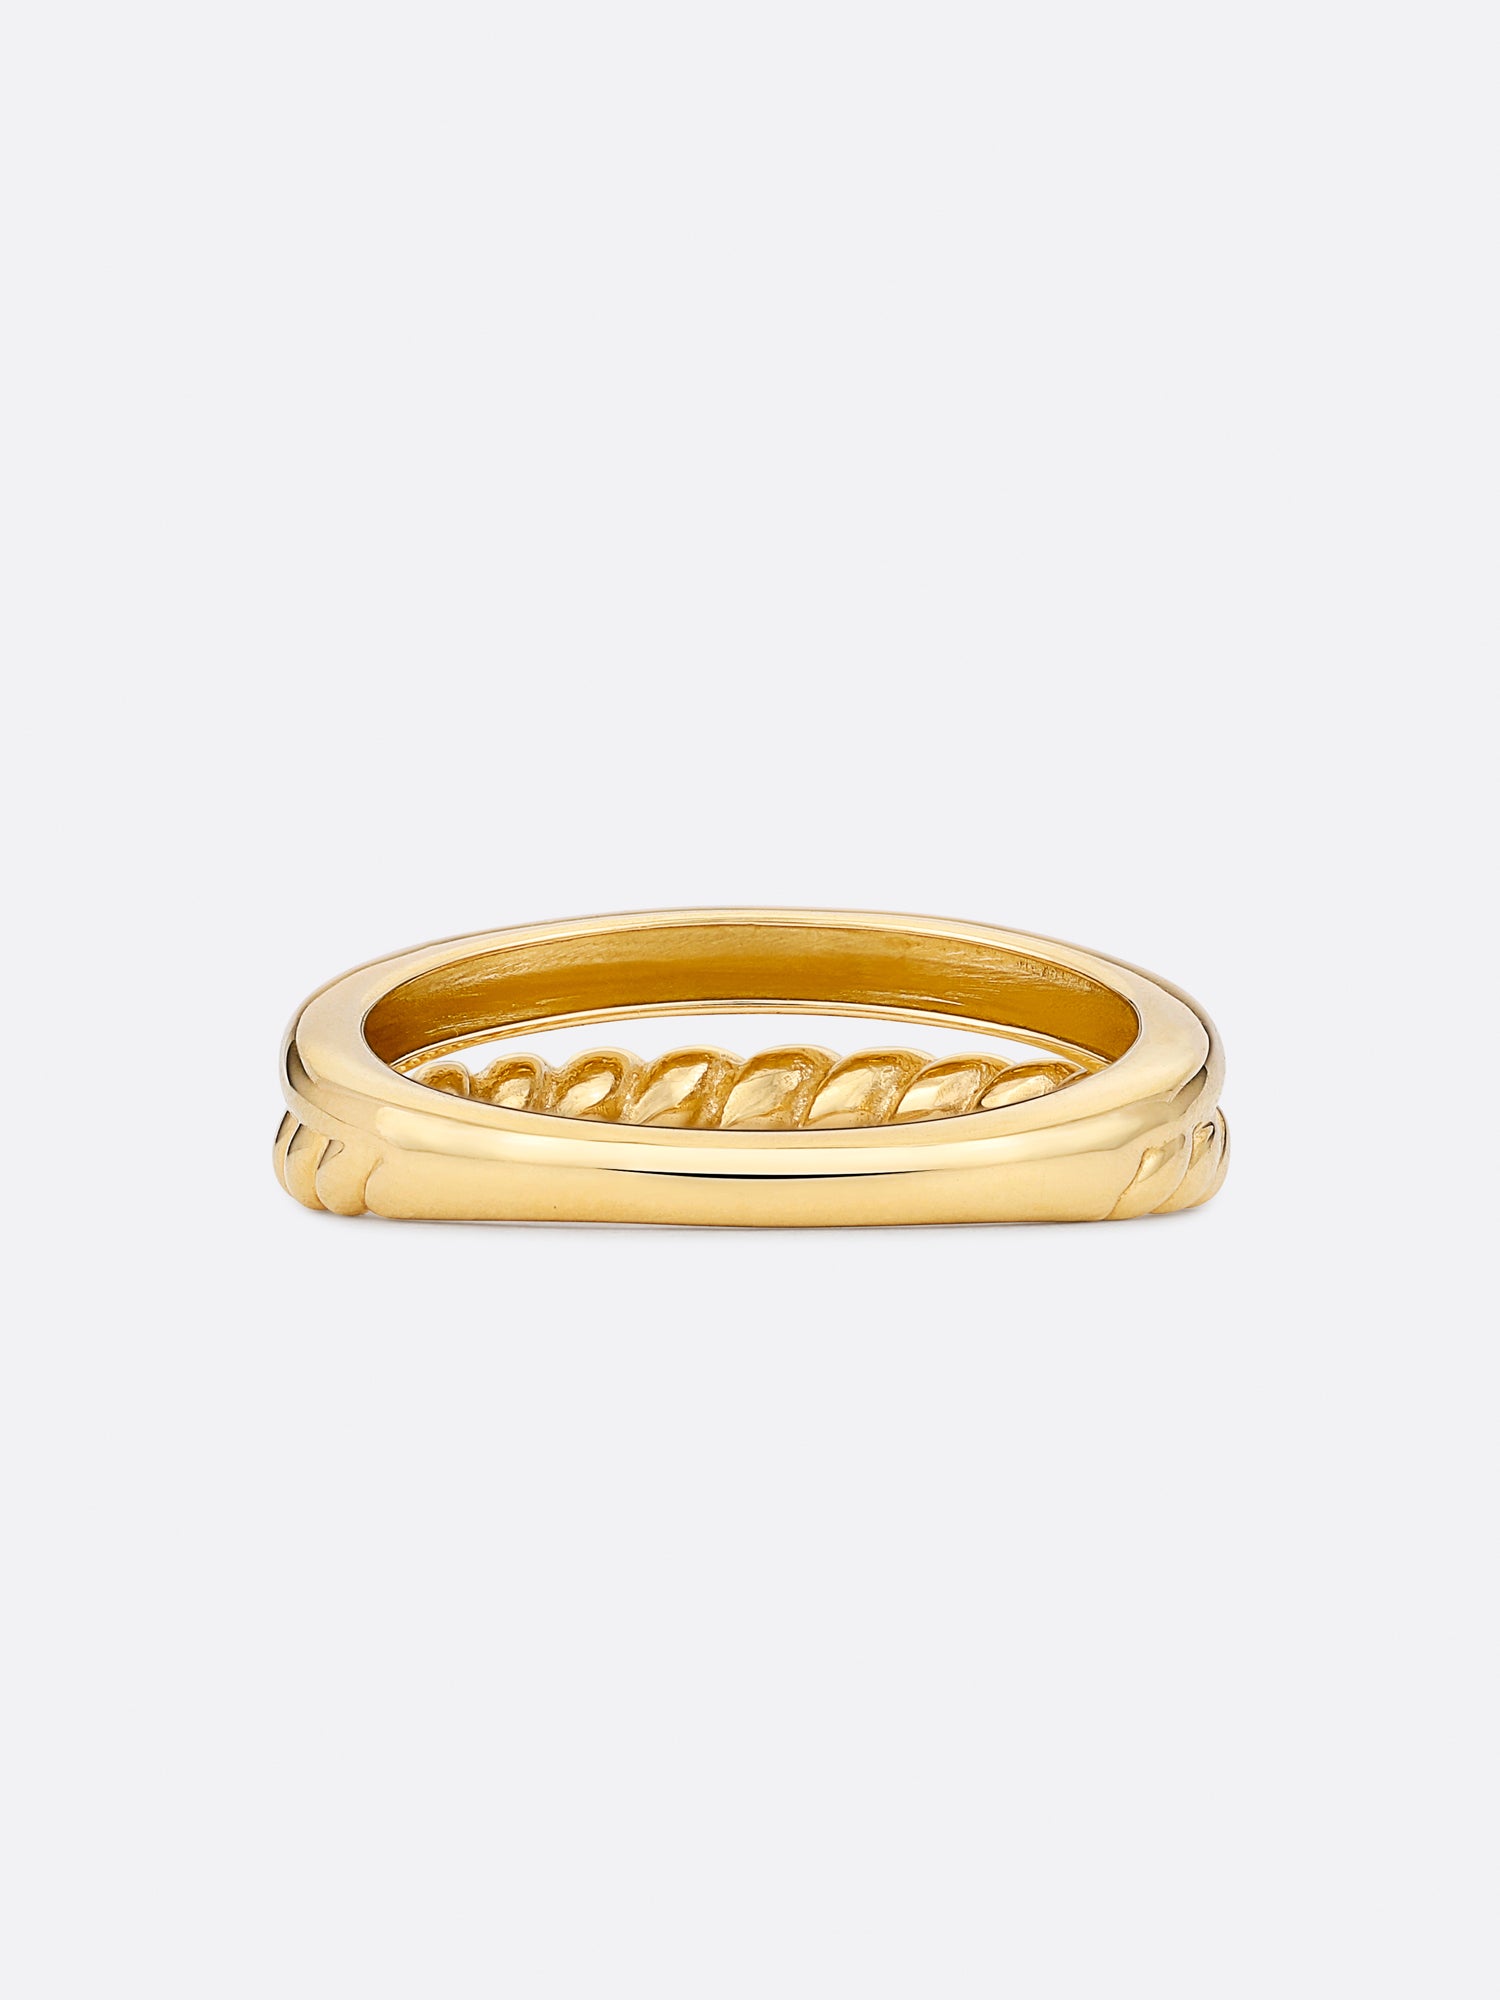 18k Yellow gold duo band ring back view